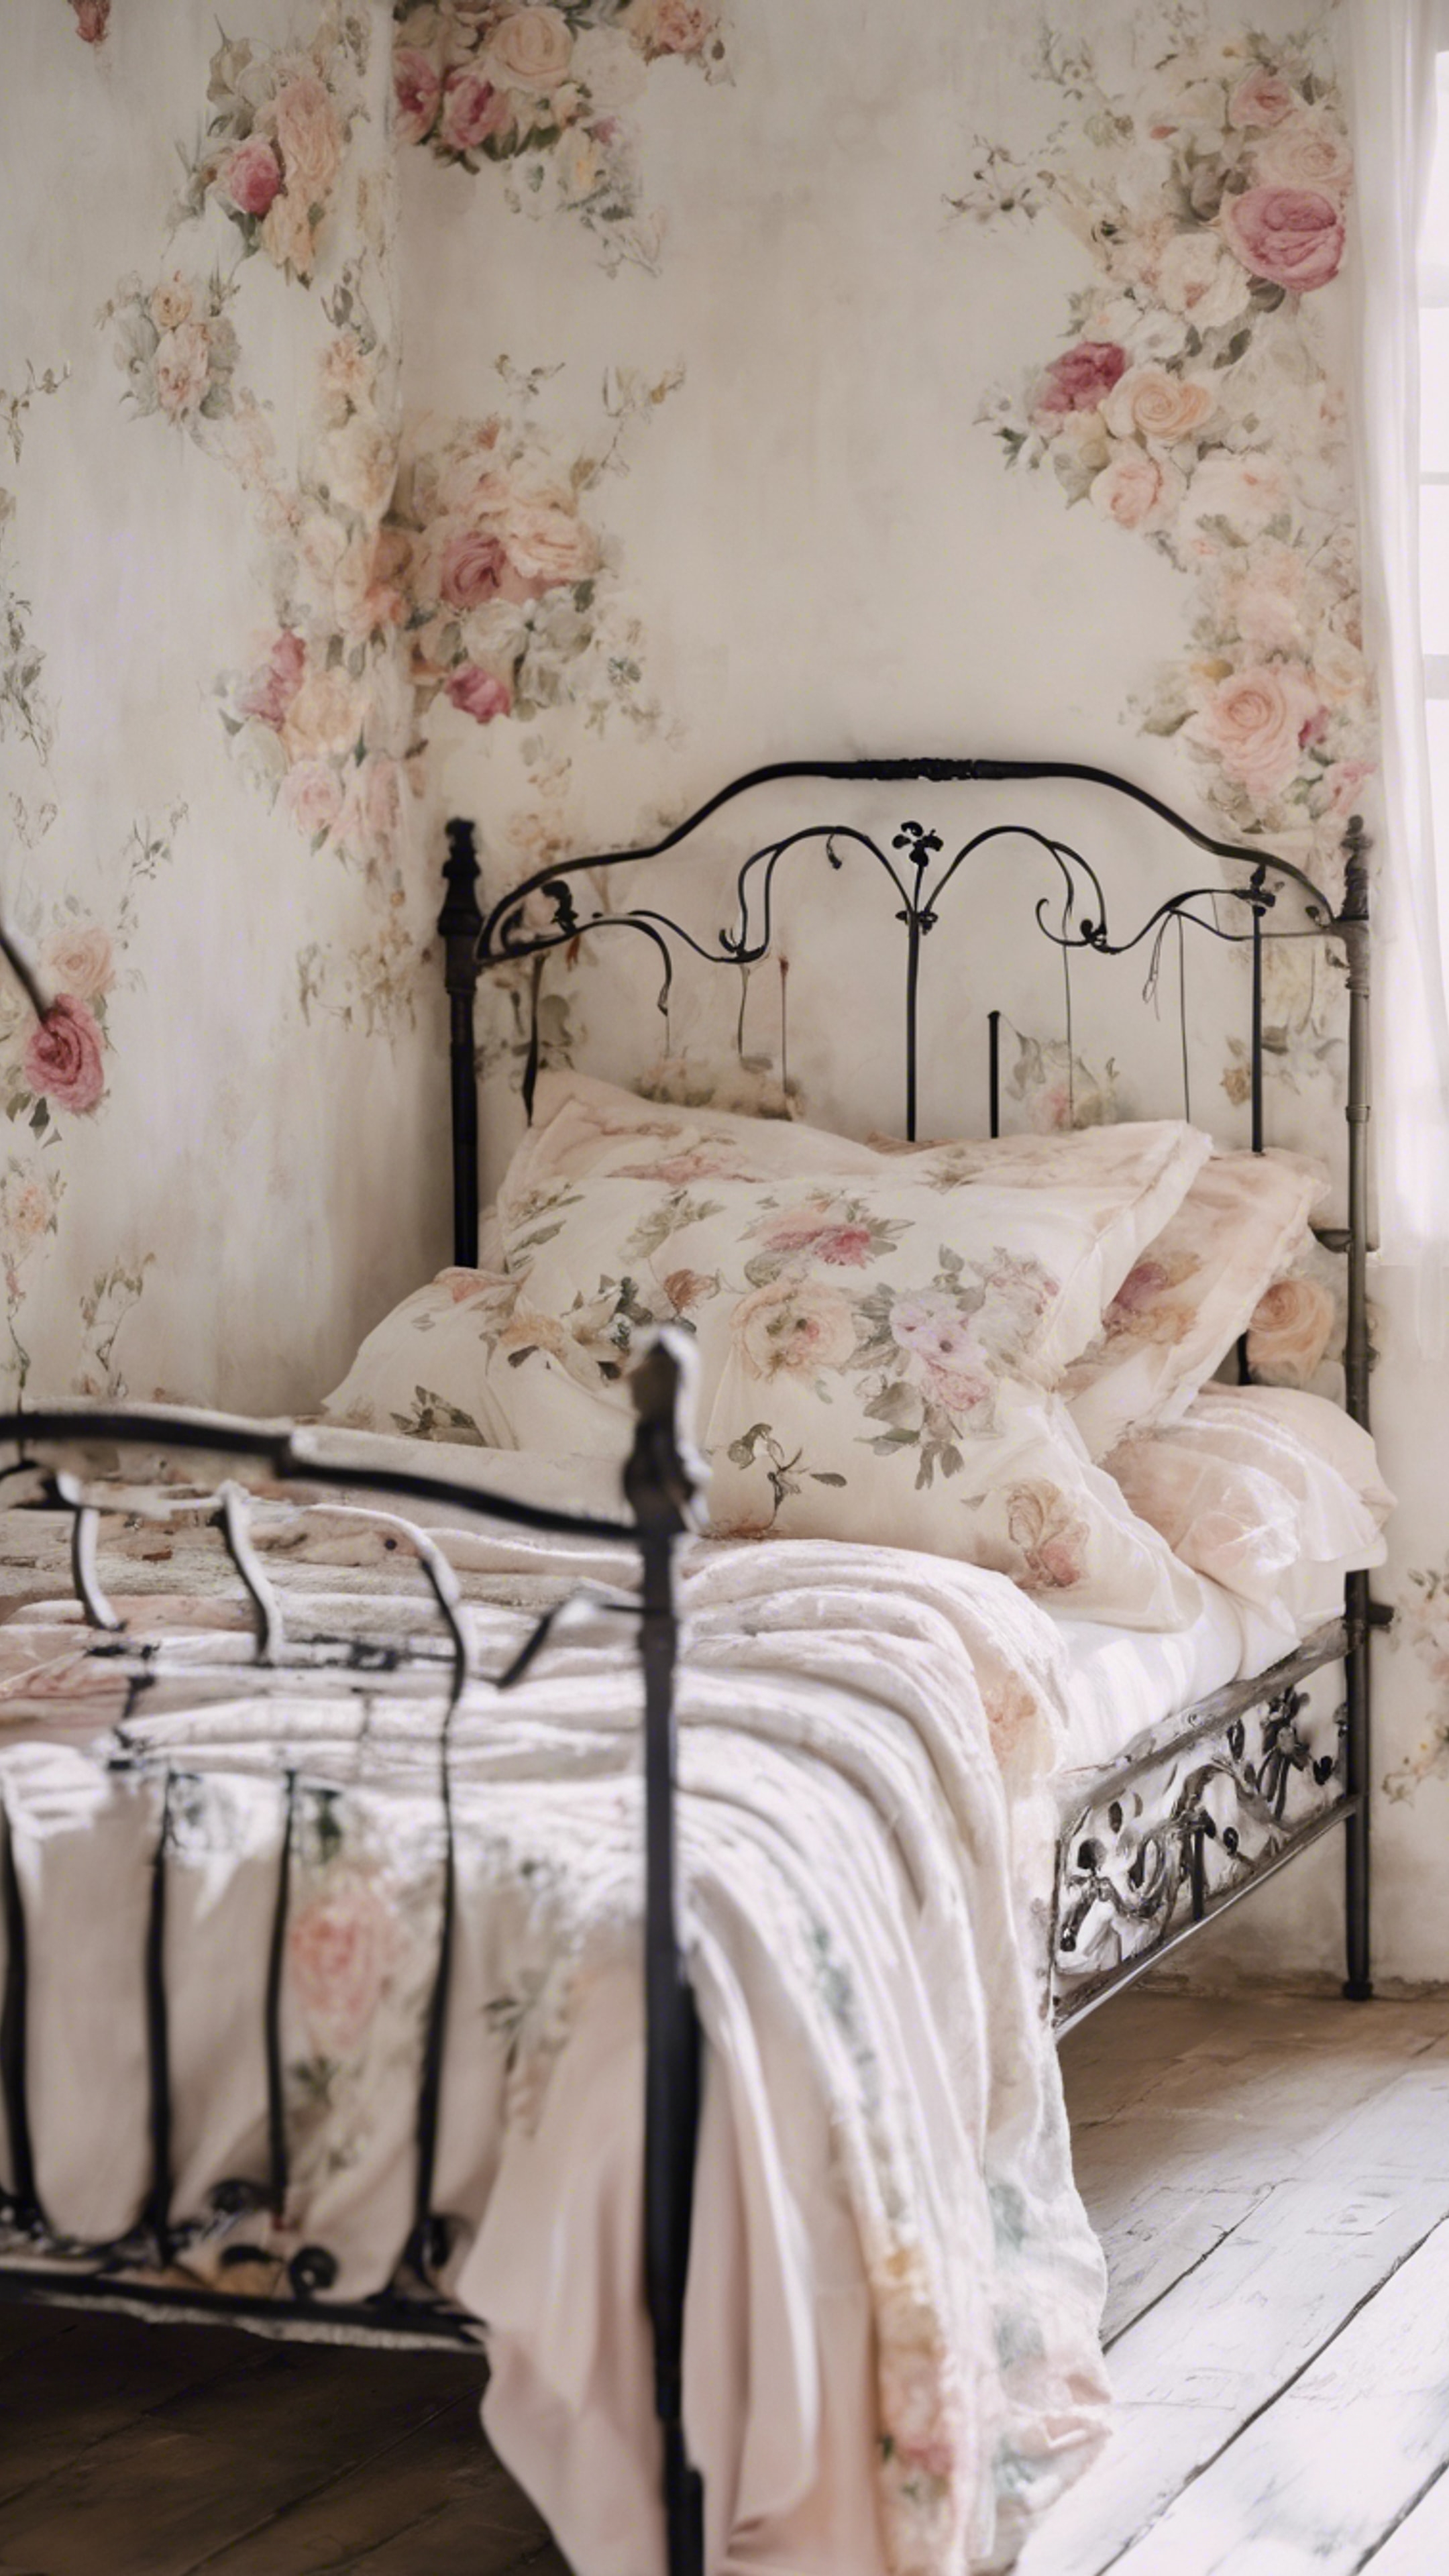 A French country bedroom featuring a wrought-iron bed and pastel floral patterns against whitewashed walls. Sfondo[80b94b8799dc4ca6abc7]